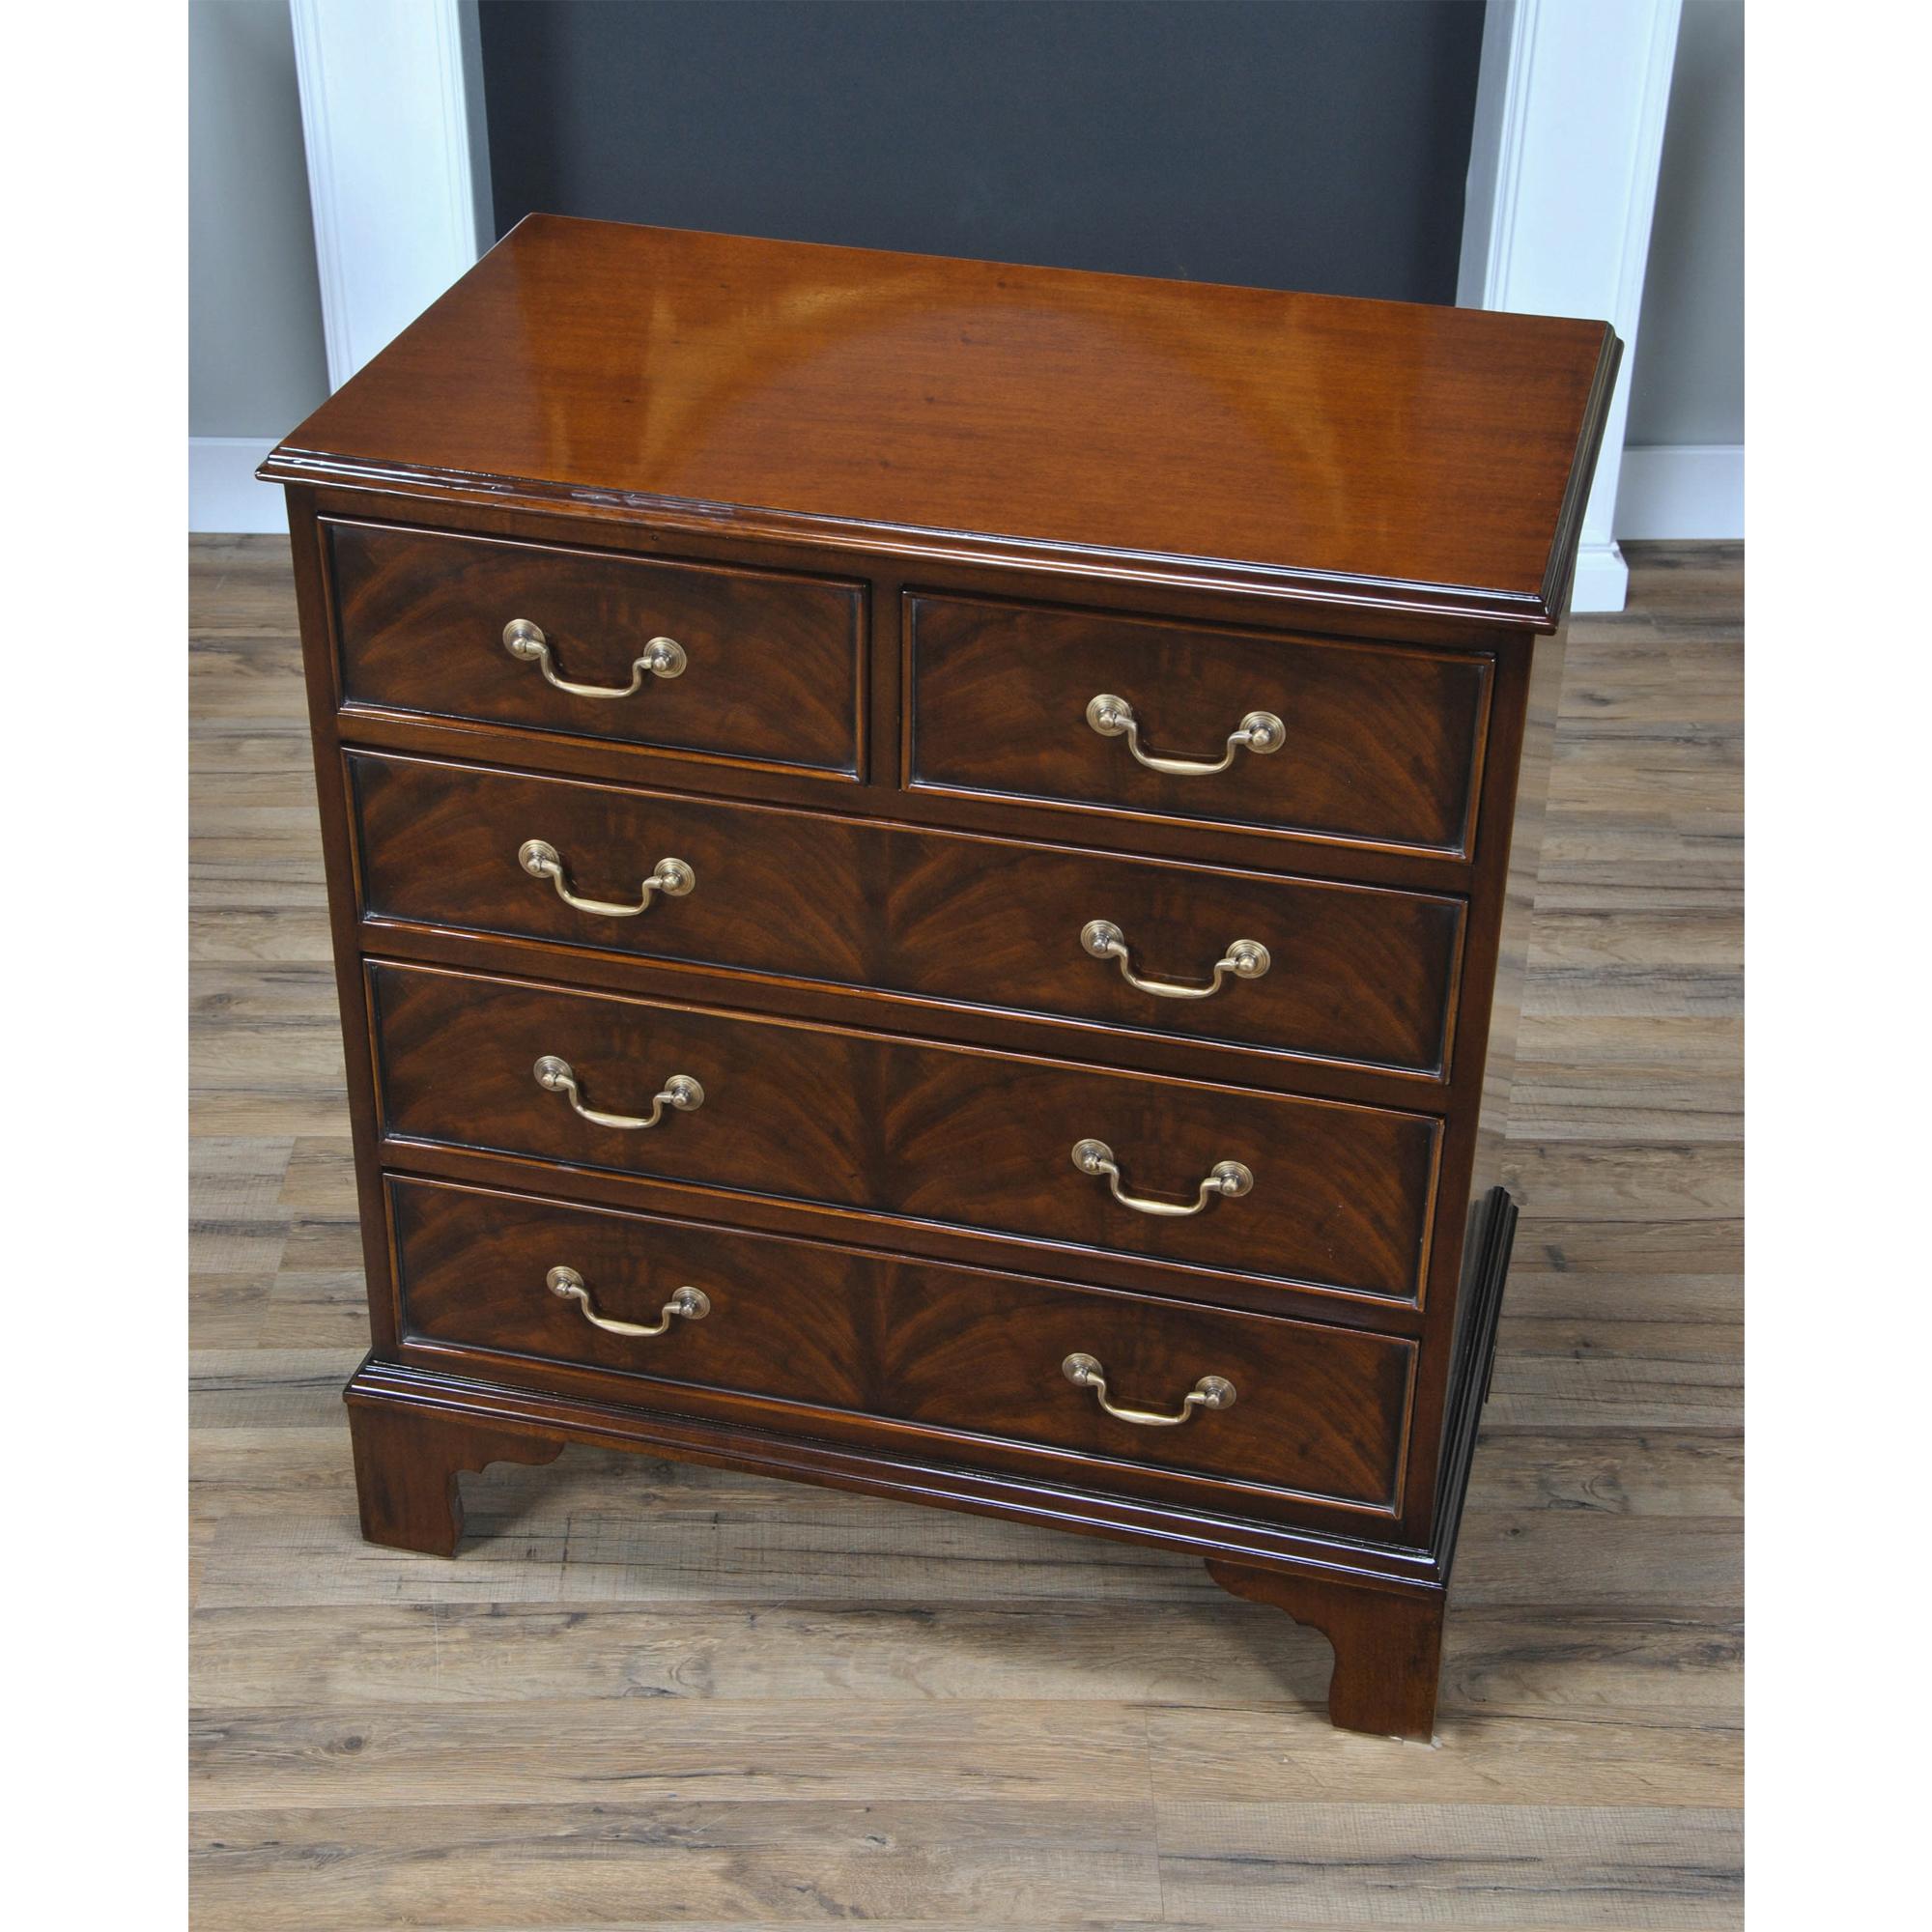 Based on an antique English chest of drawers this high quality Mahogany Bachelors Chest is both versatile and attractive in appearance. The shaped top rests over the two half width drawers, over top three full size graduated drawers all constructed